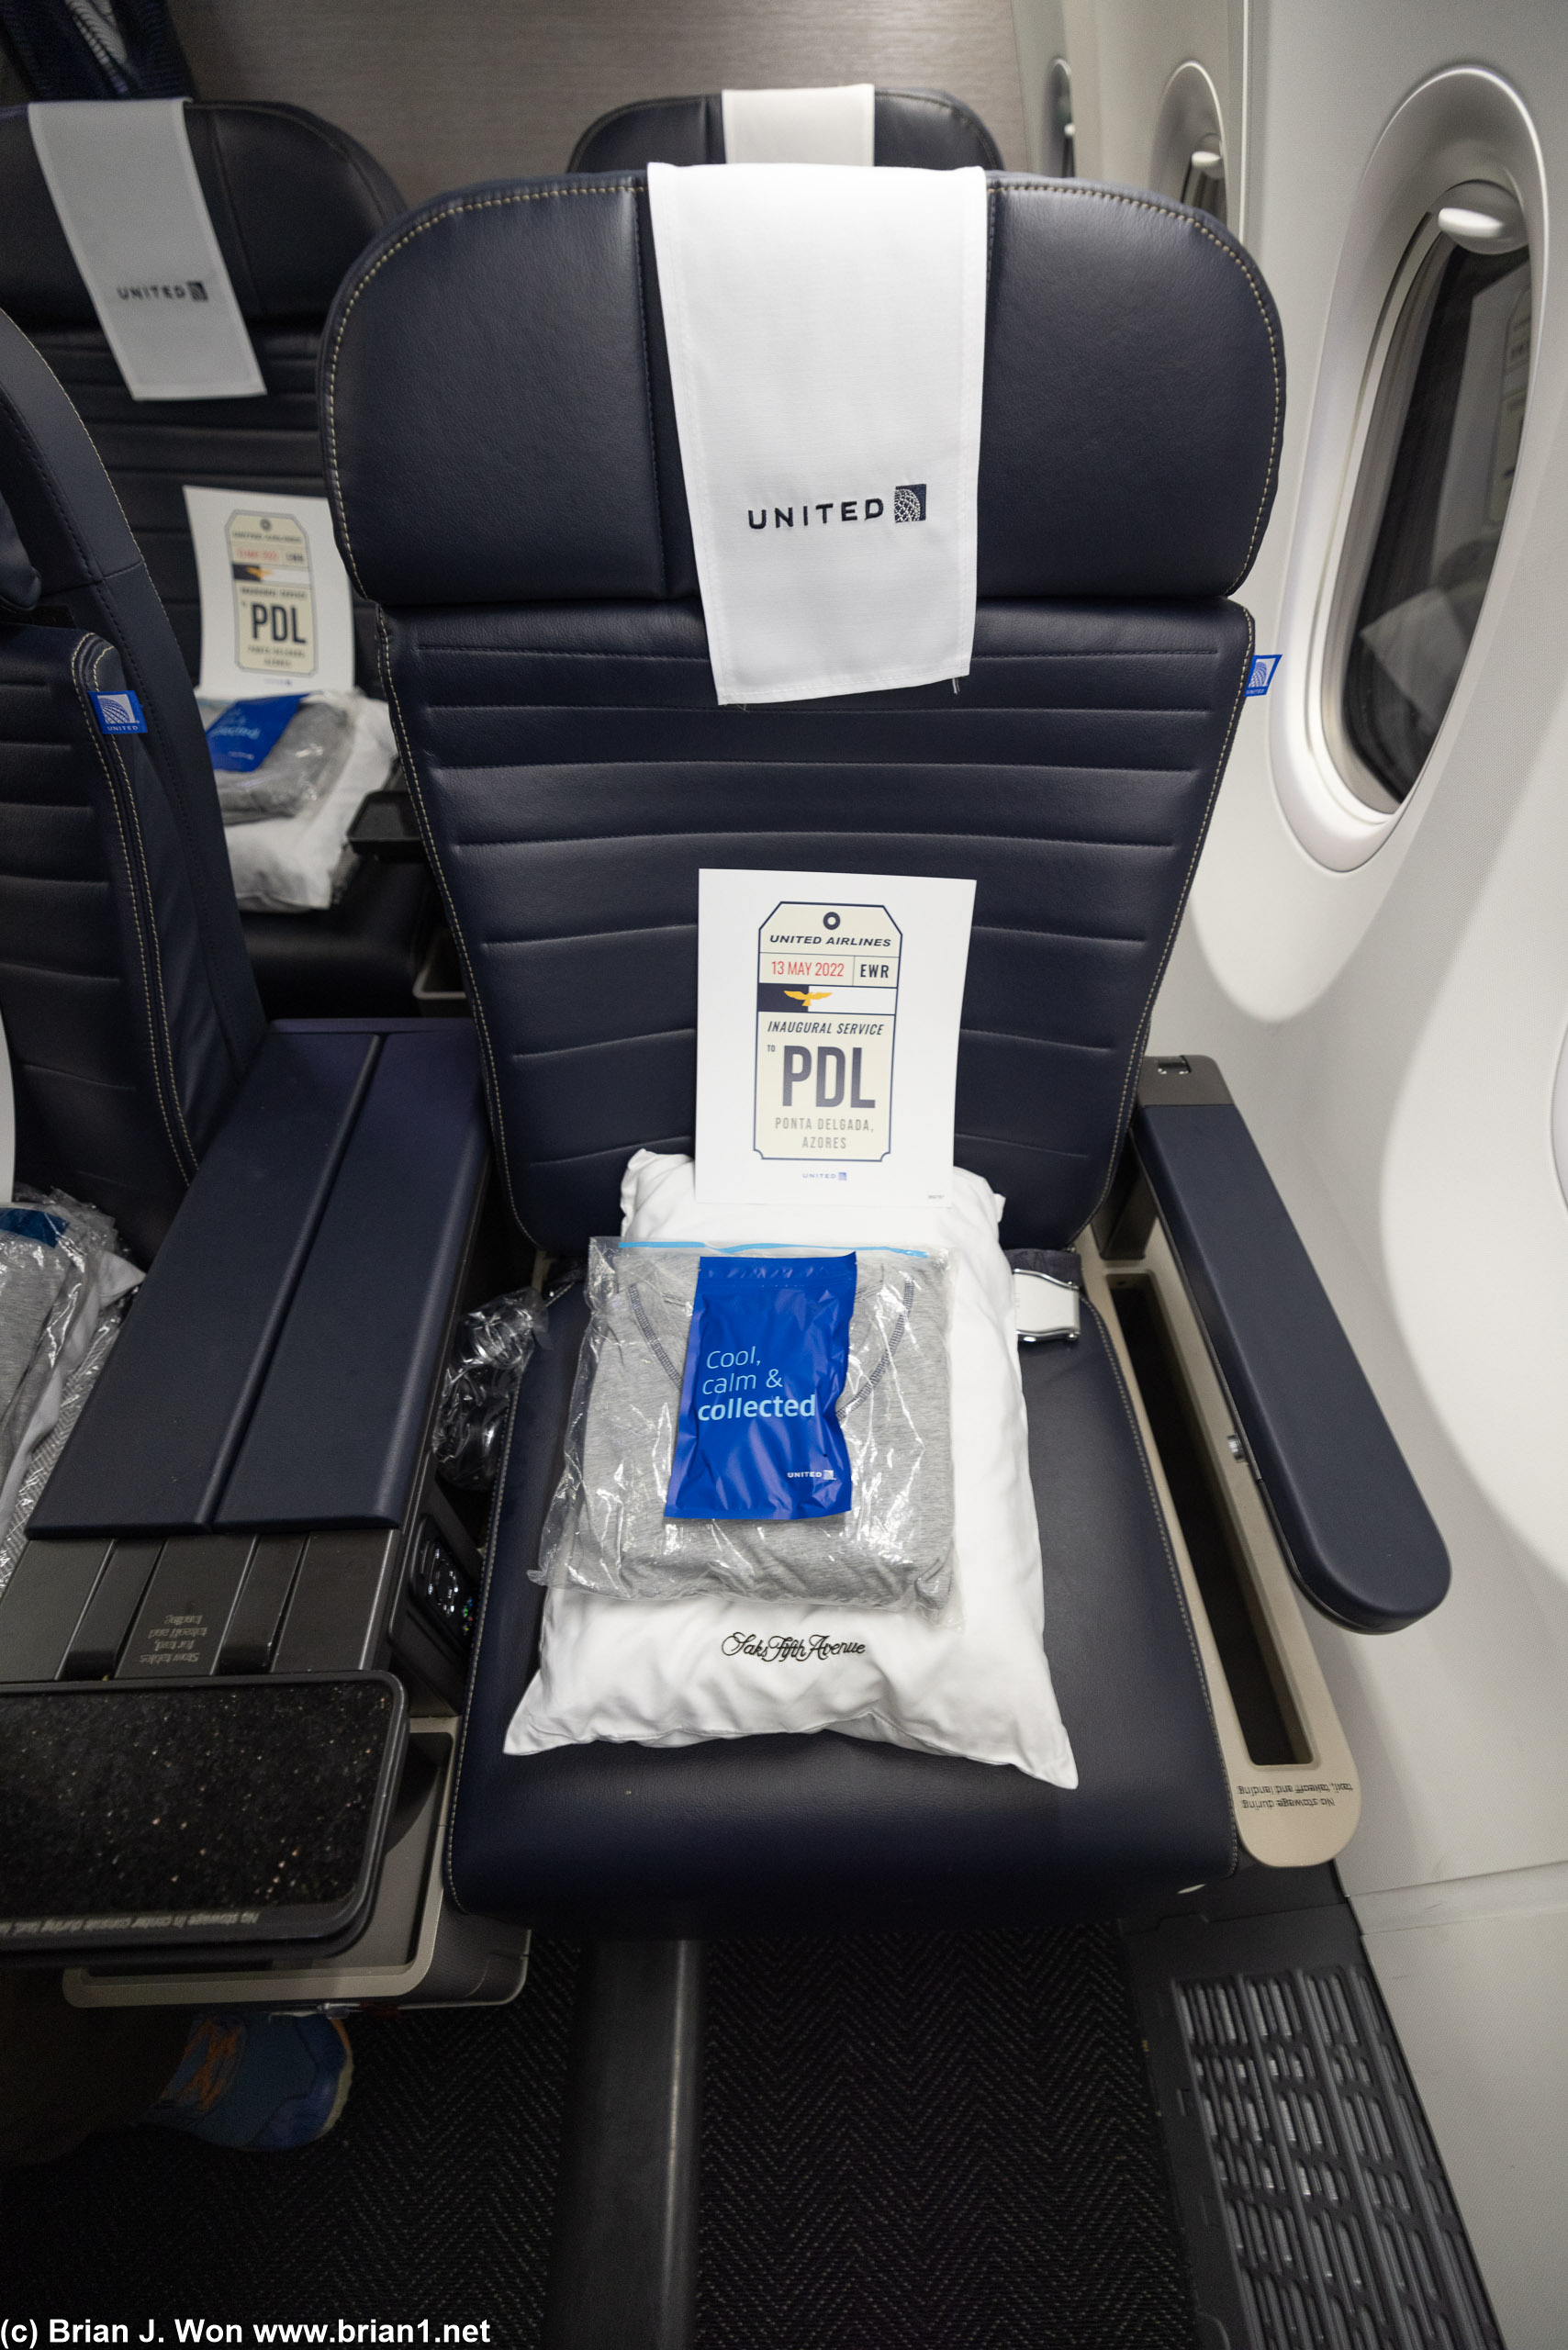 Domestic first class seat being sold as Premium Plus (premium economy).